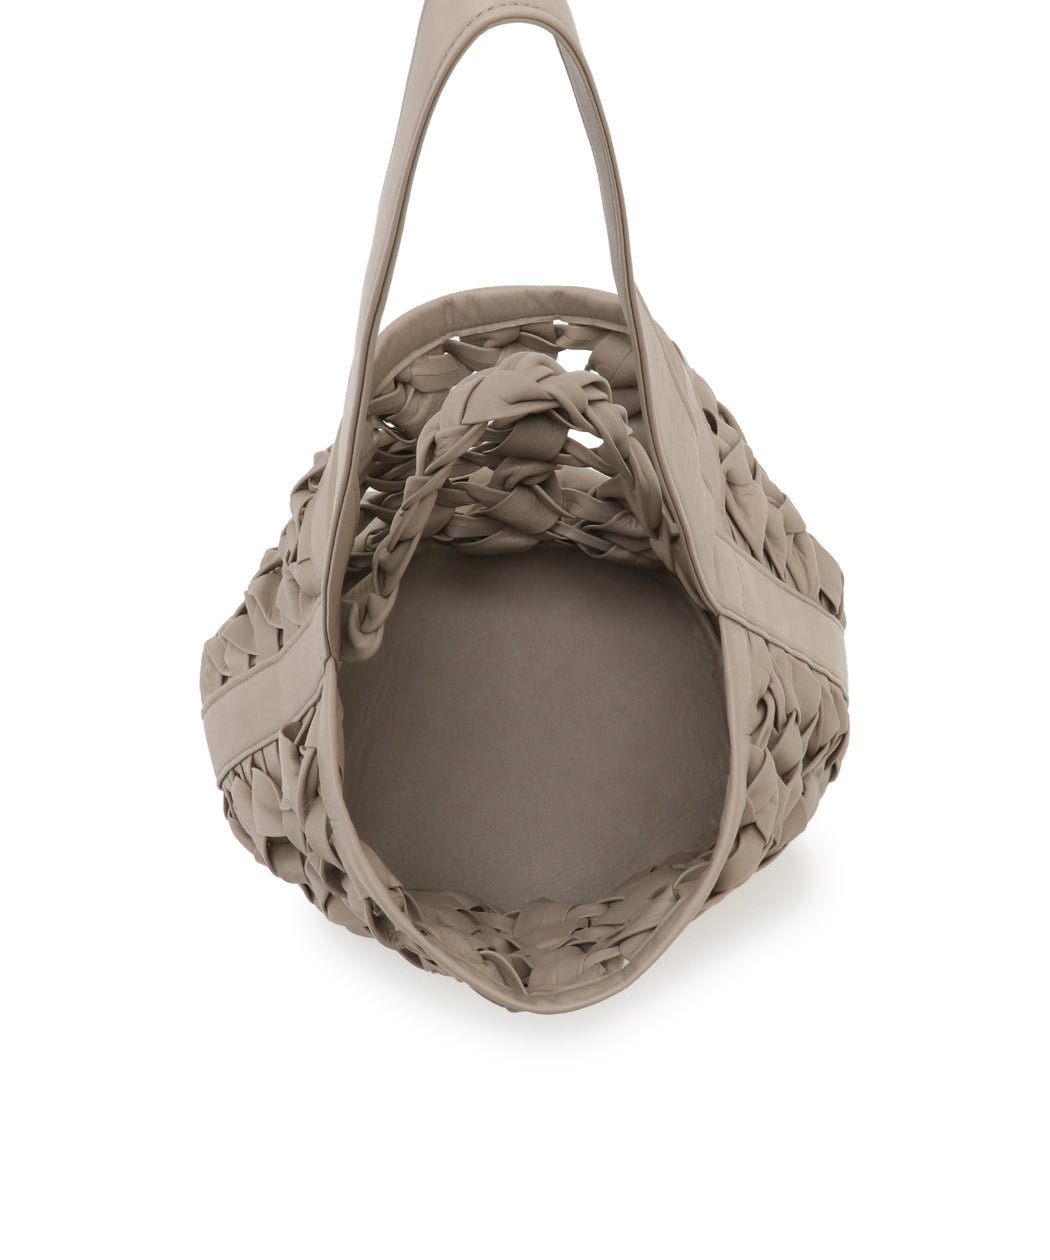 Woven leather basket